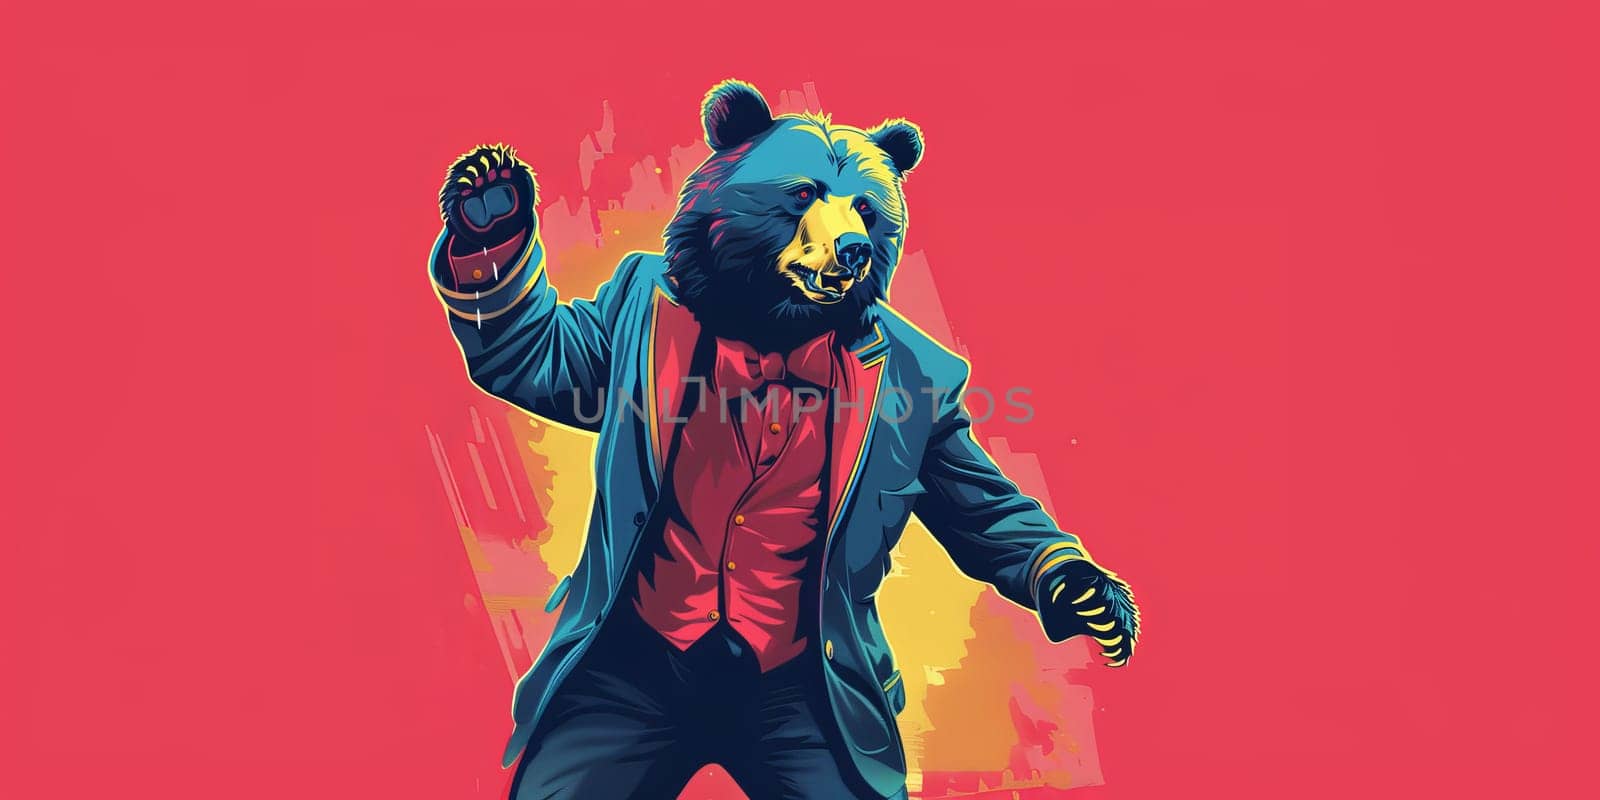 Dancing circus bear isolated on the colorful background by Kadula